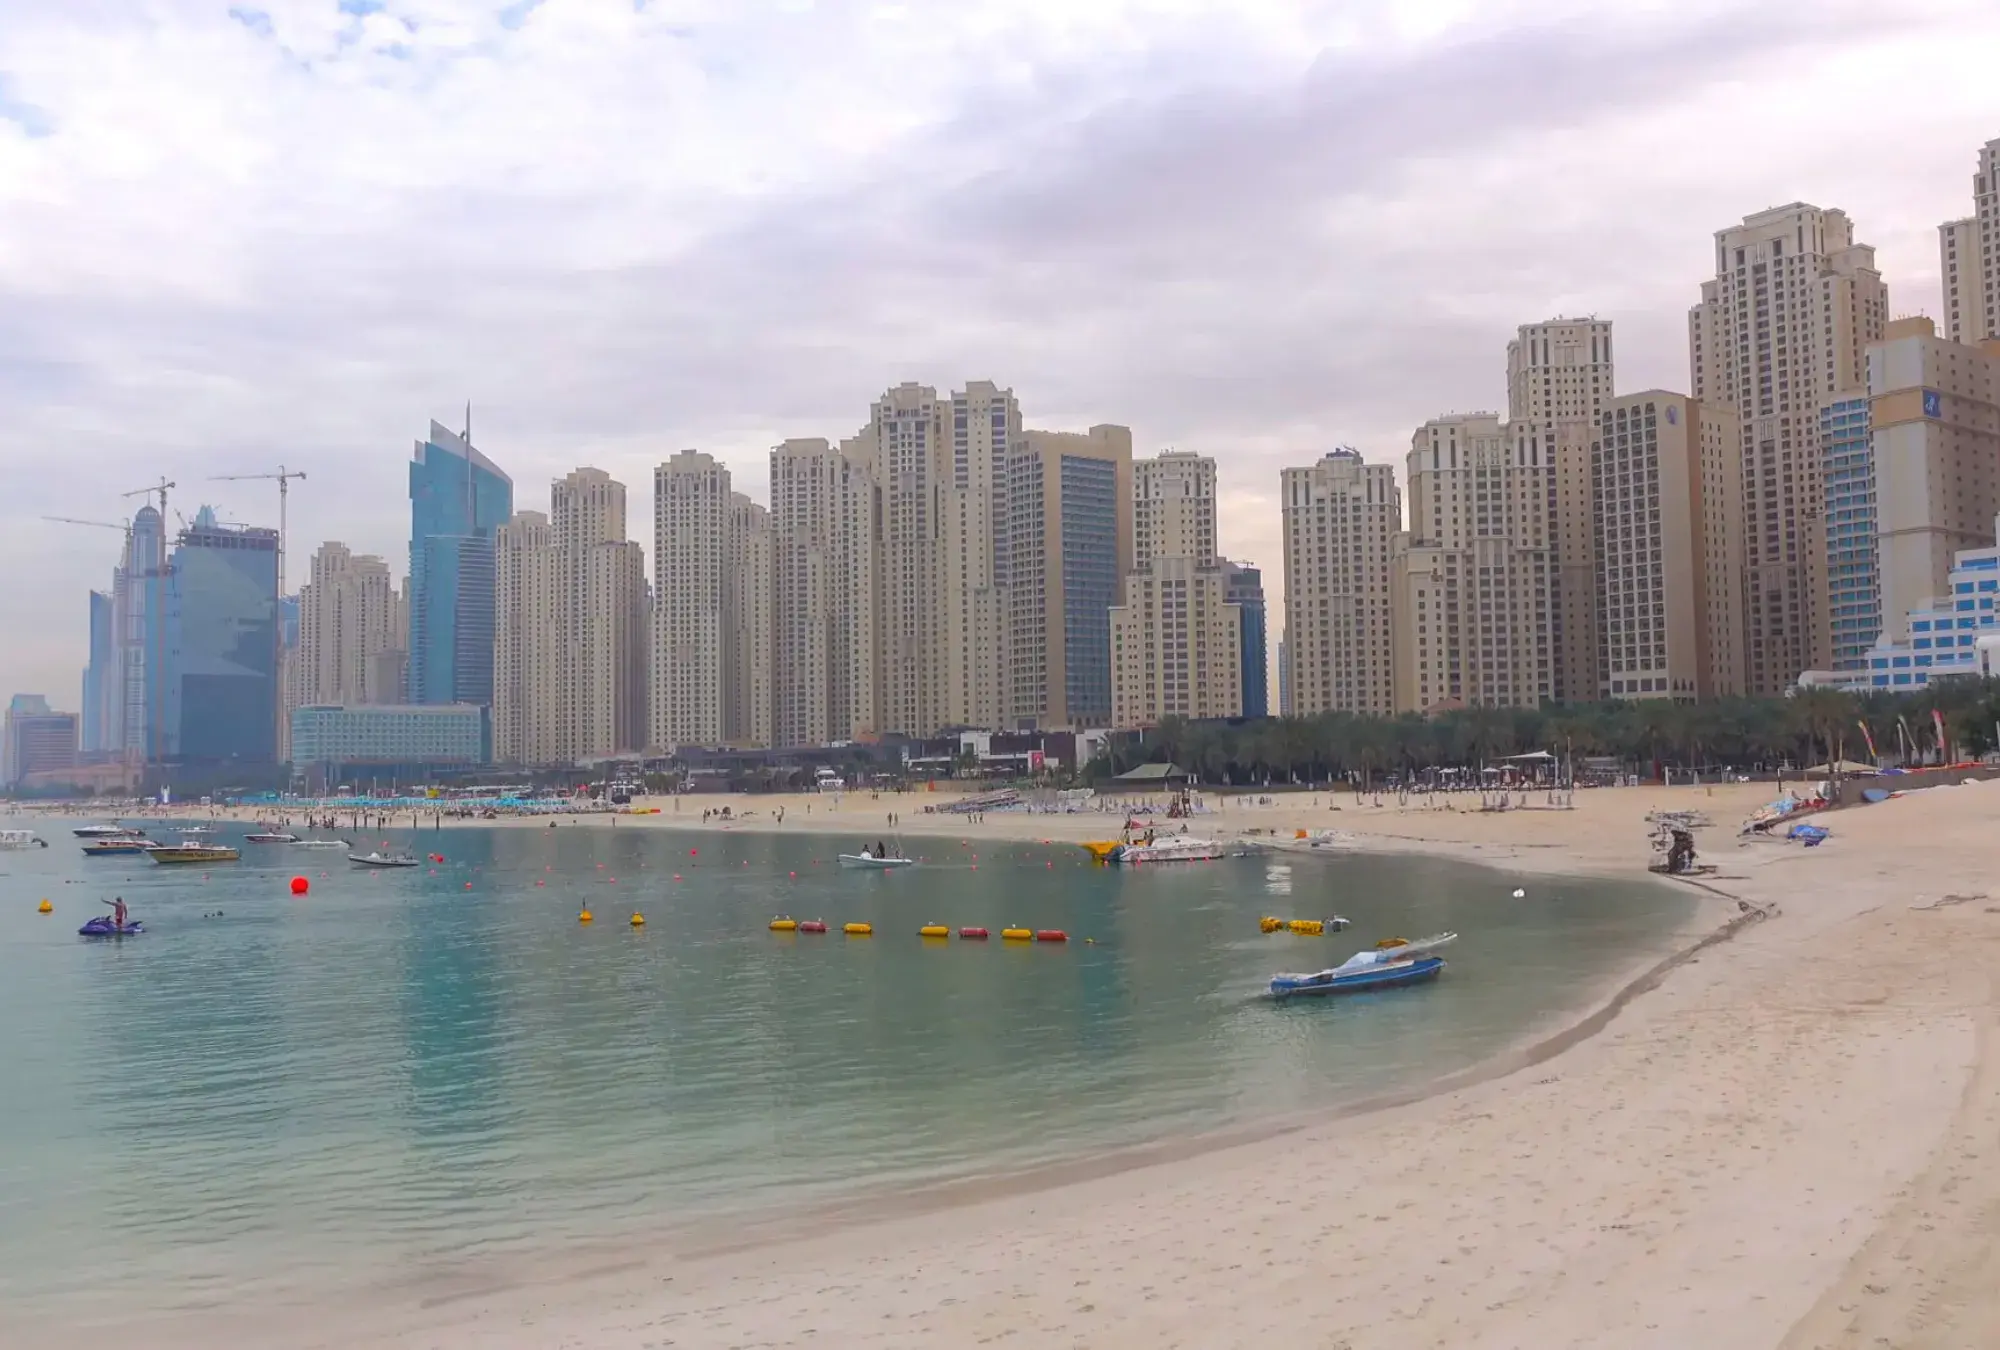 the-beach-jbr:-one-of-the-most-crowded-free-beaches-in-dubai-1706255752